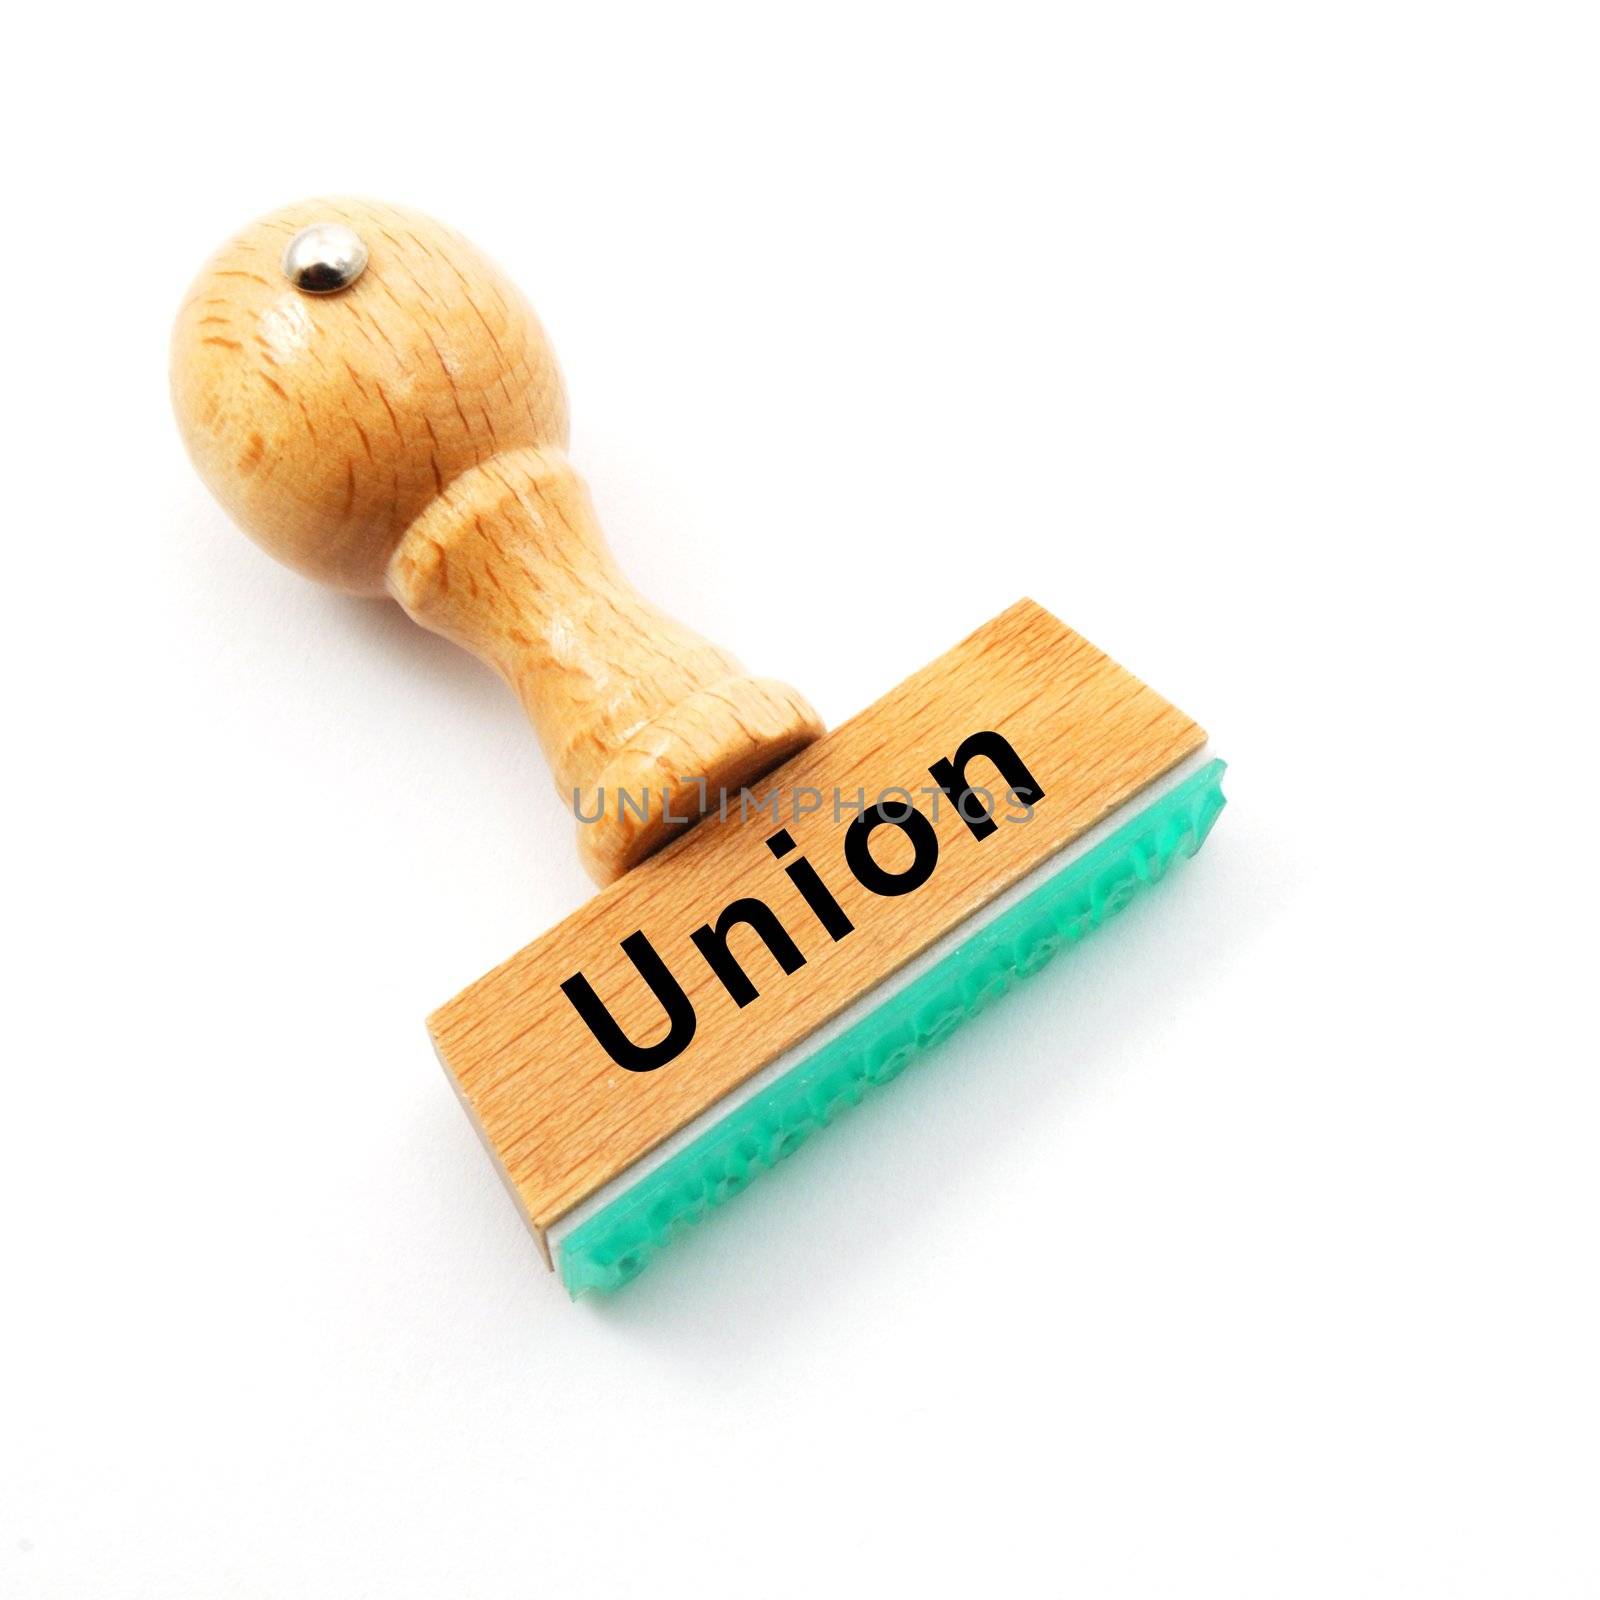 union concept with stamp and documents in the office